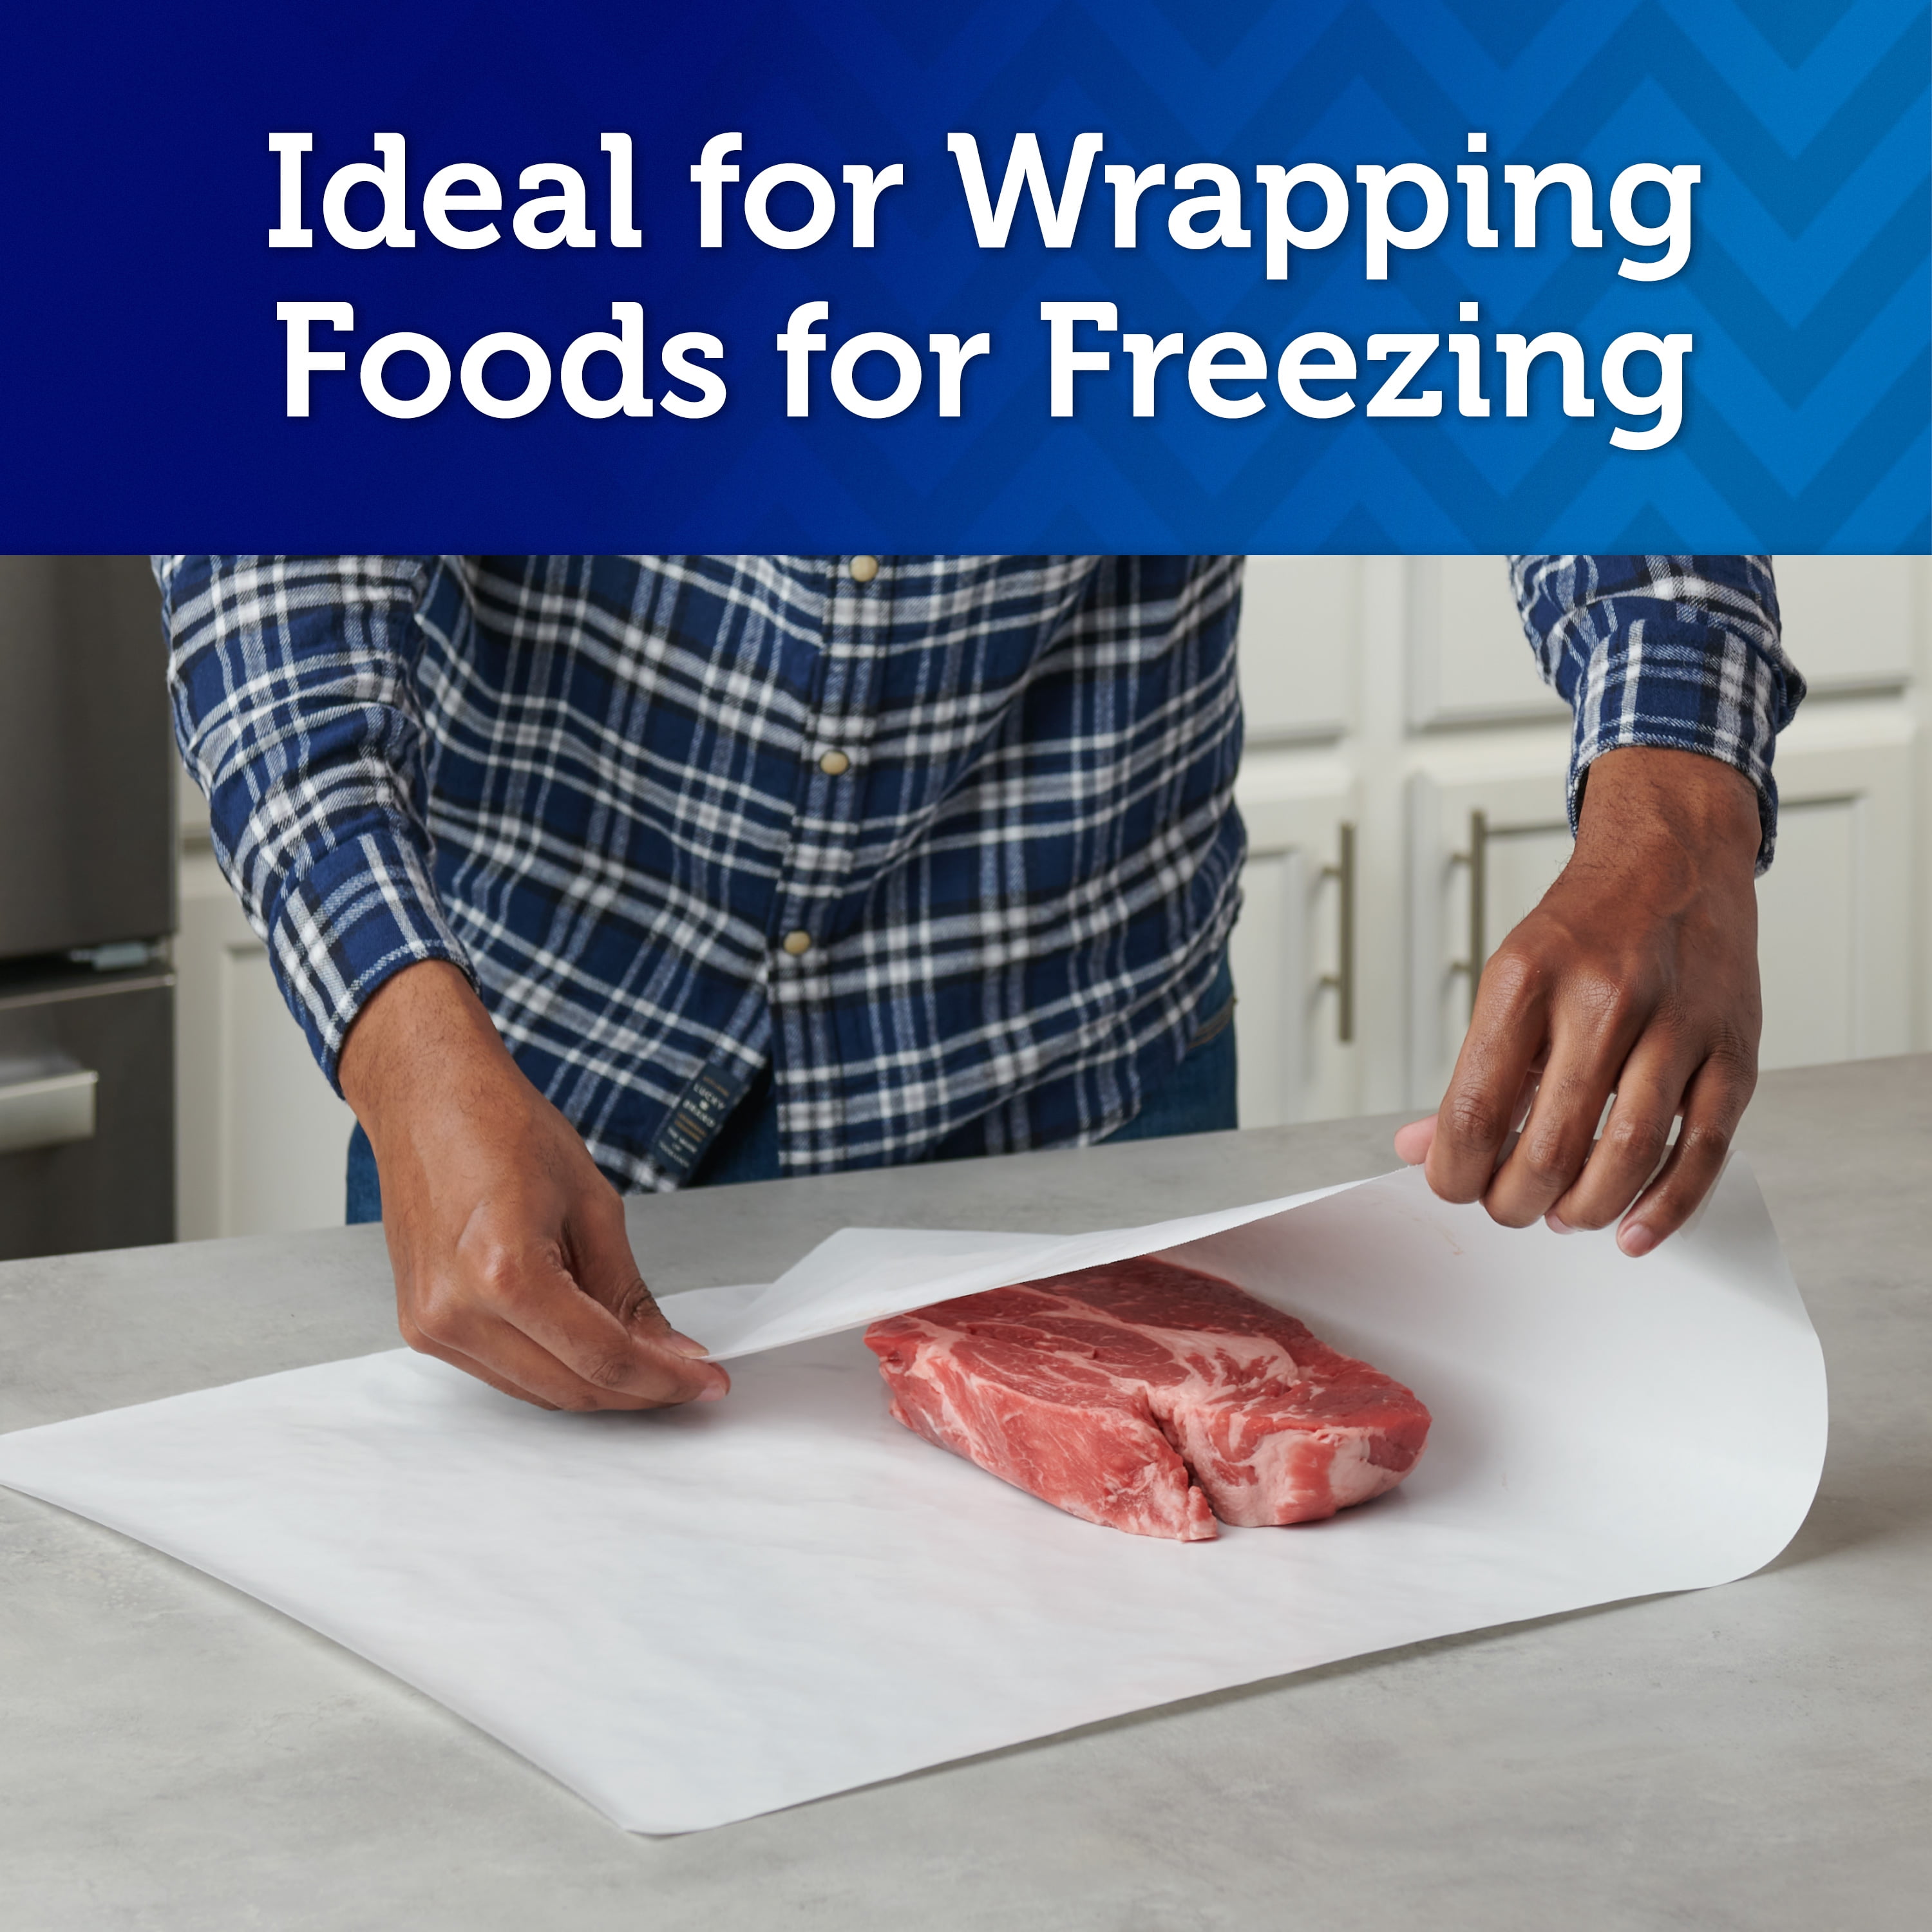 Reynolds Freezer Paper Plastic Coated 18 inch Total of 150 Sq ft Butcher Wrap